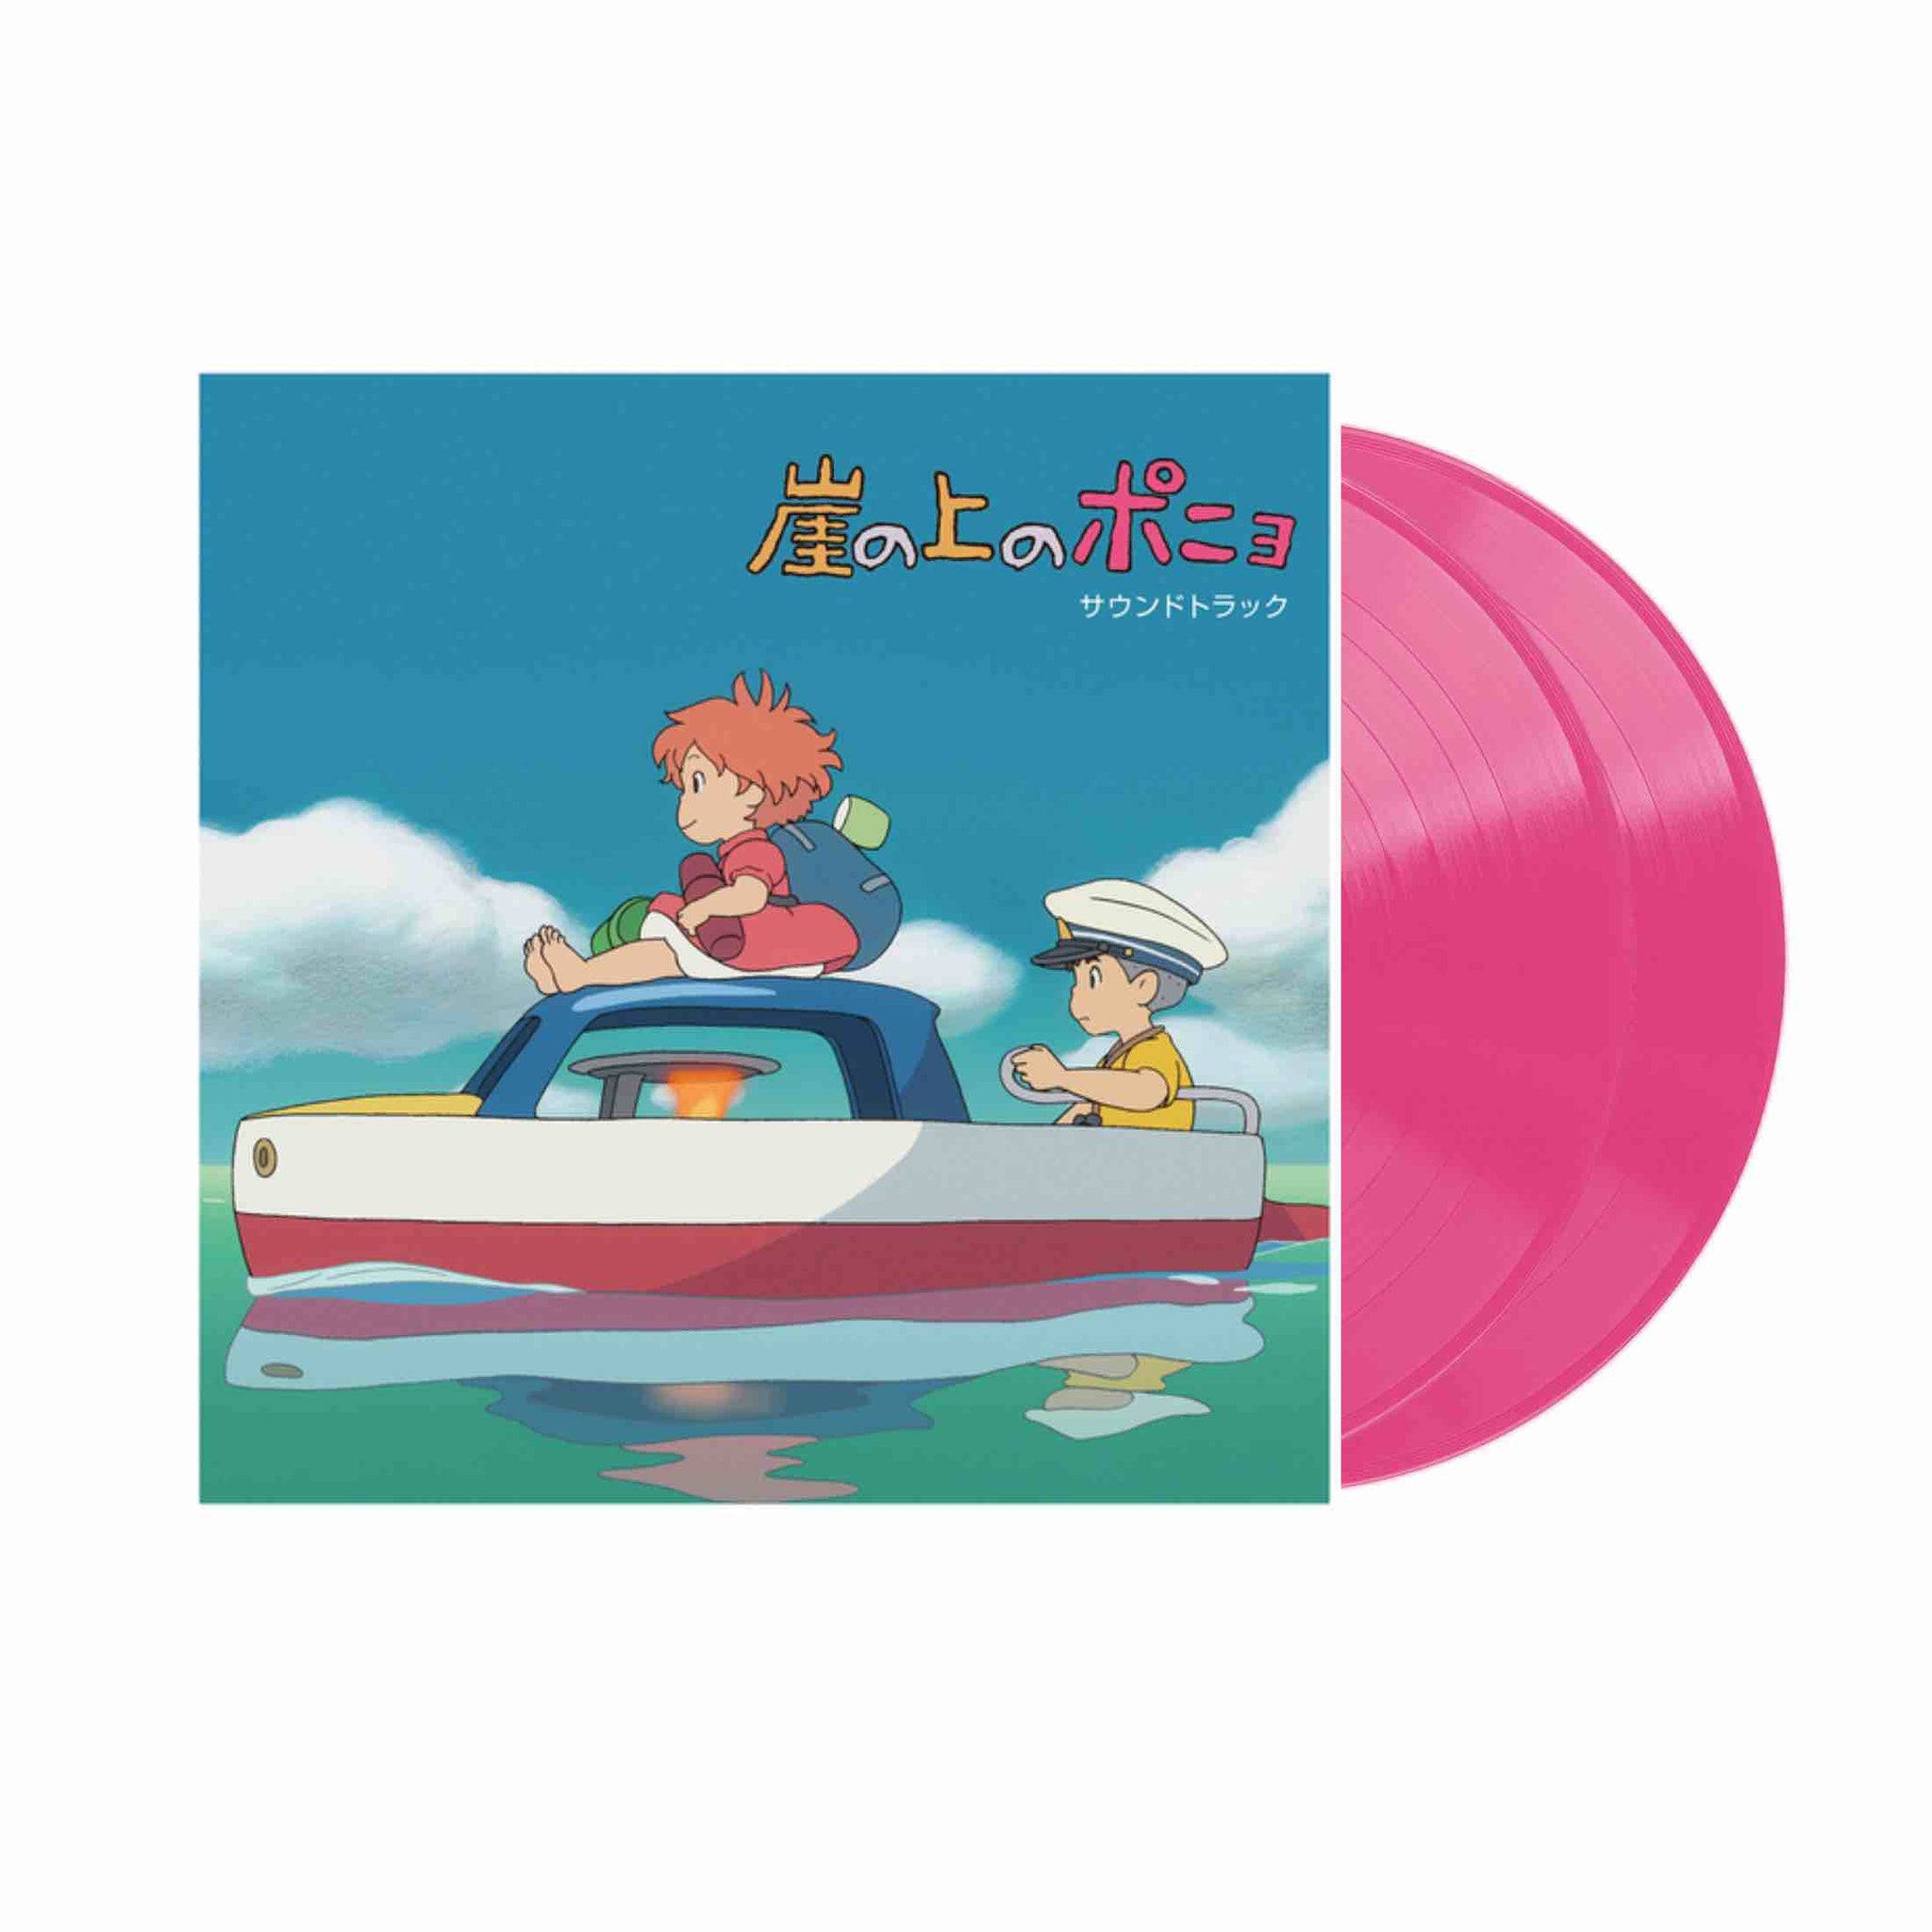 Ponyo On The Cliff By The Sea - Soundtrack 2xLP (Violet Vinyl)